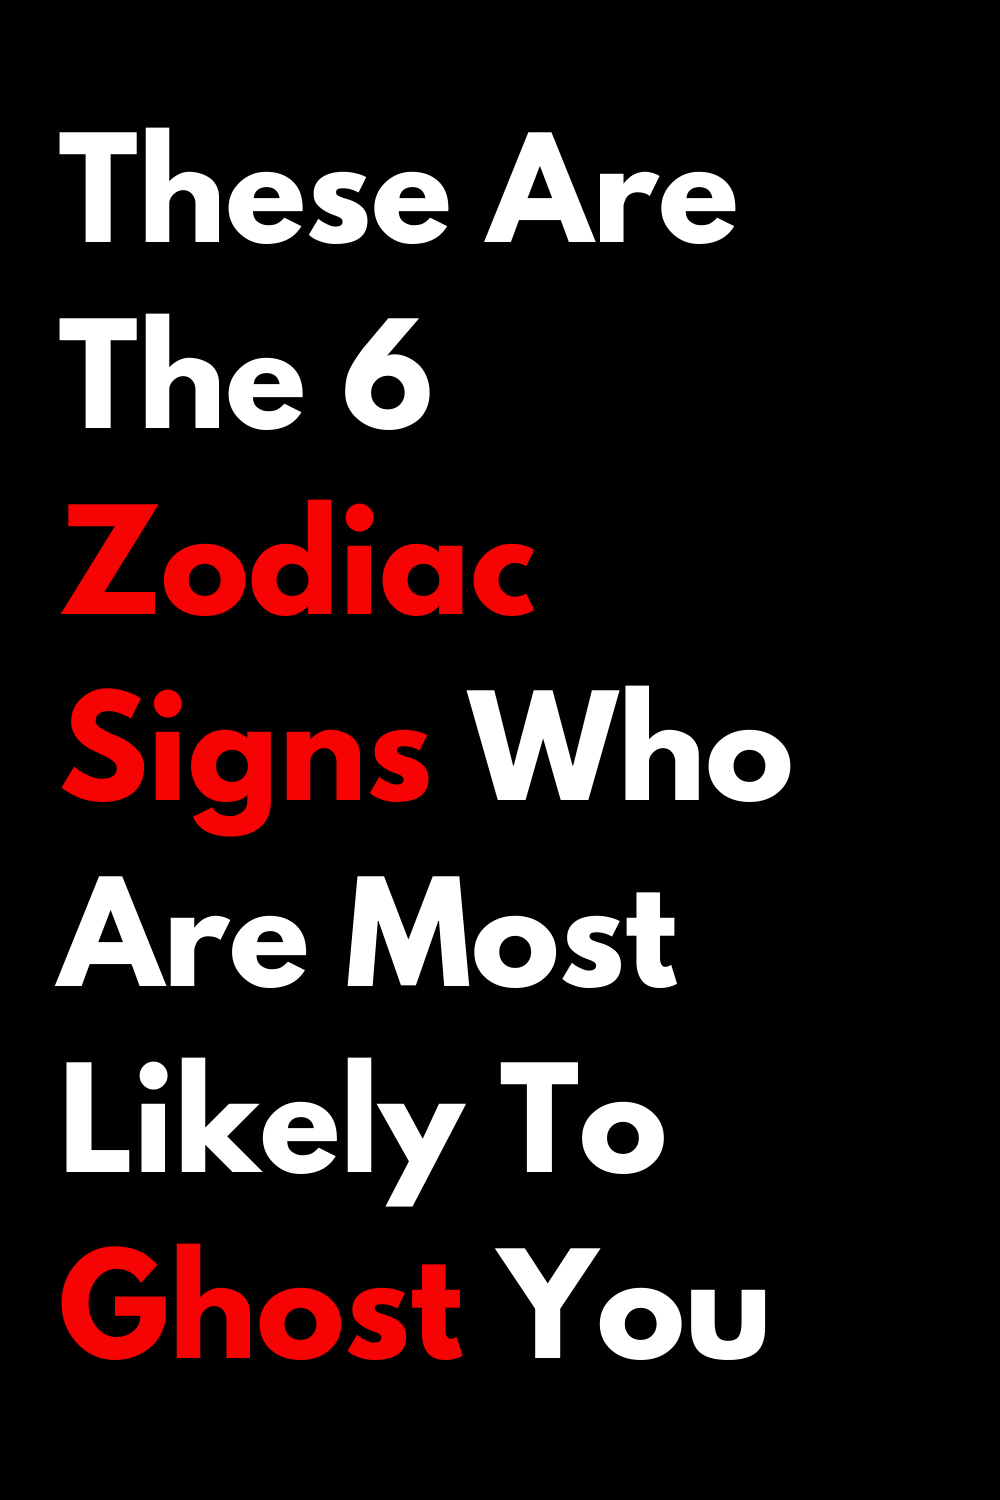 These Are The 6 Zodiac Signs Who Are Most Likely To Ghost You